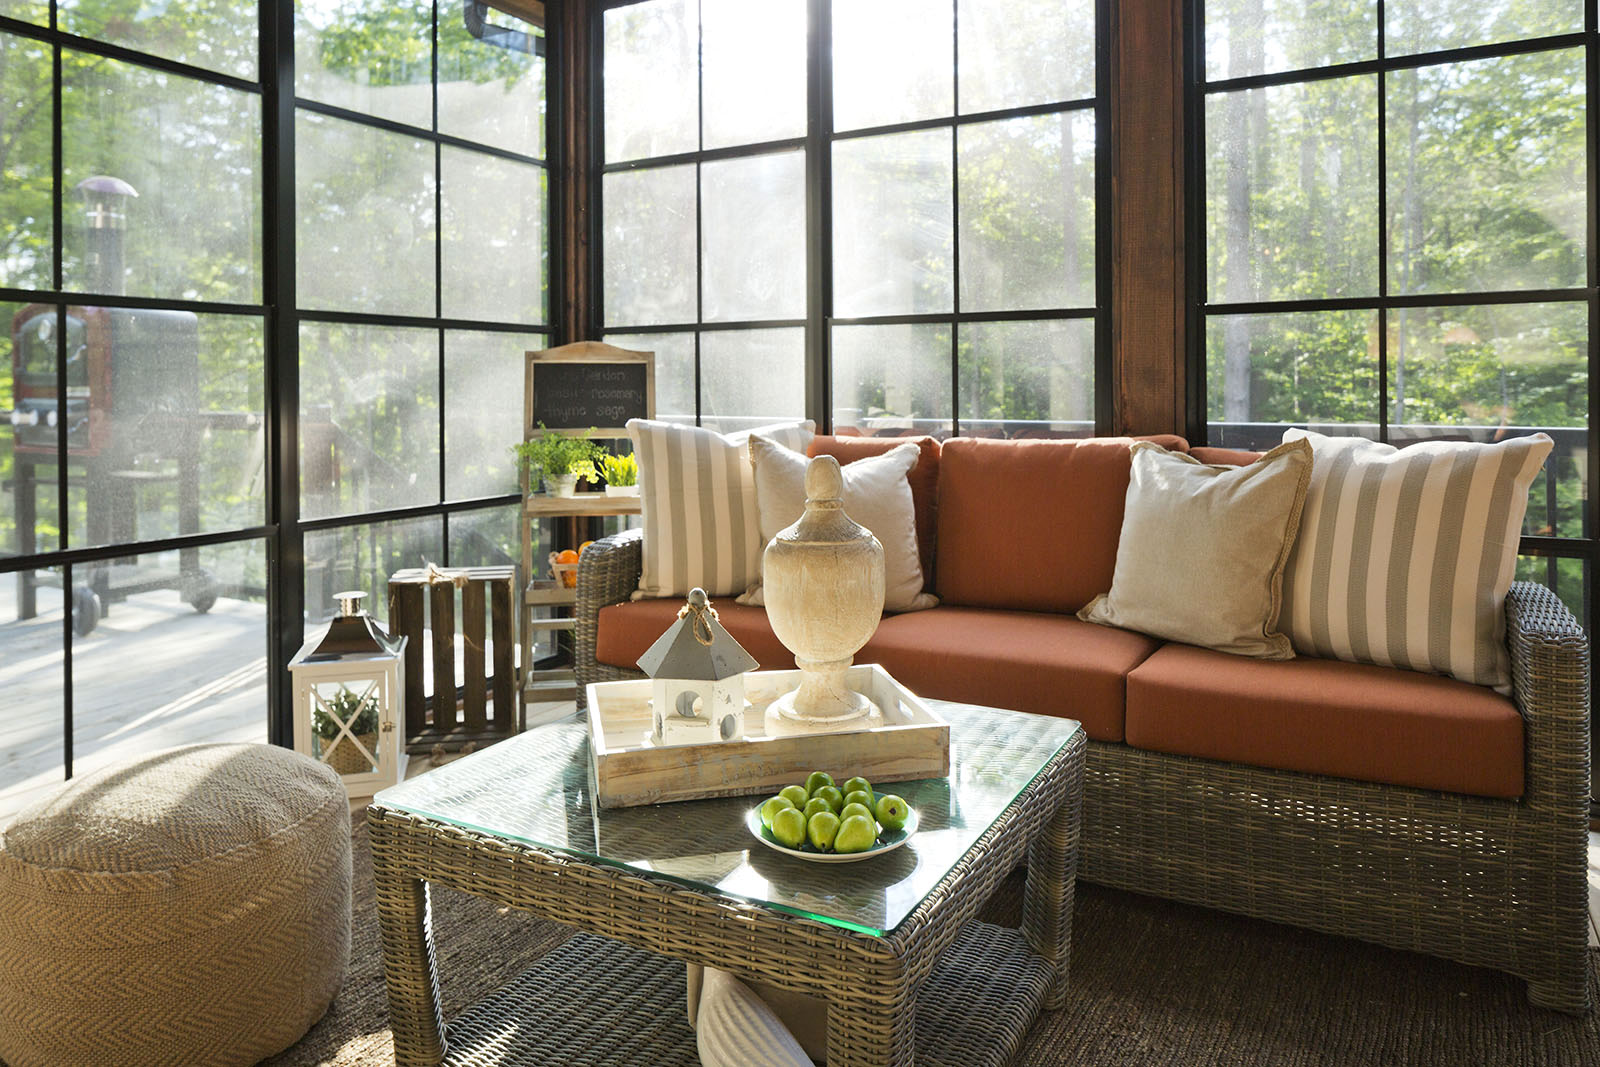 Sunroom of a rustic-style house